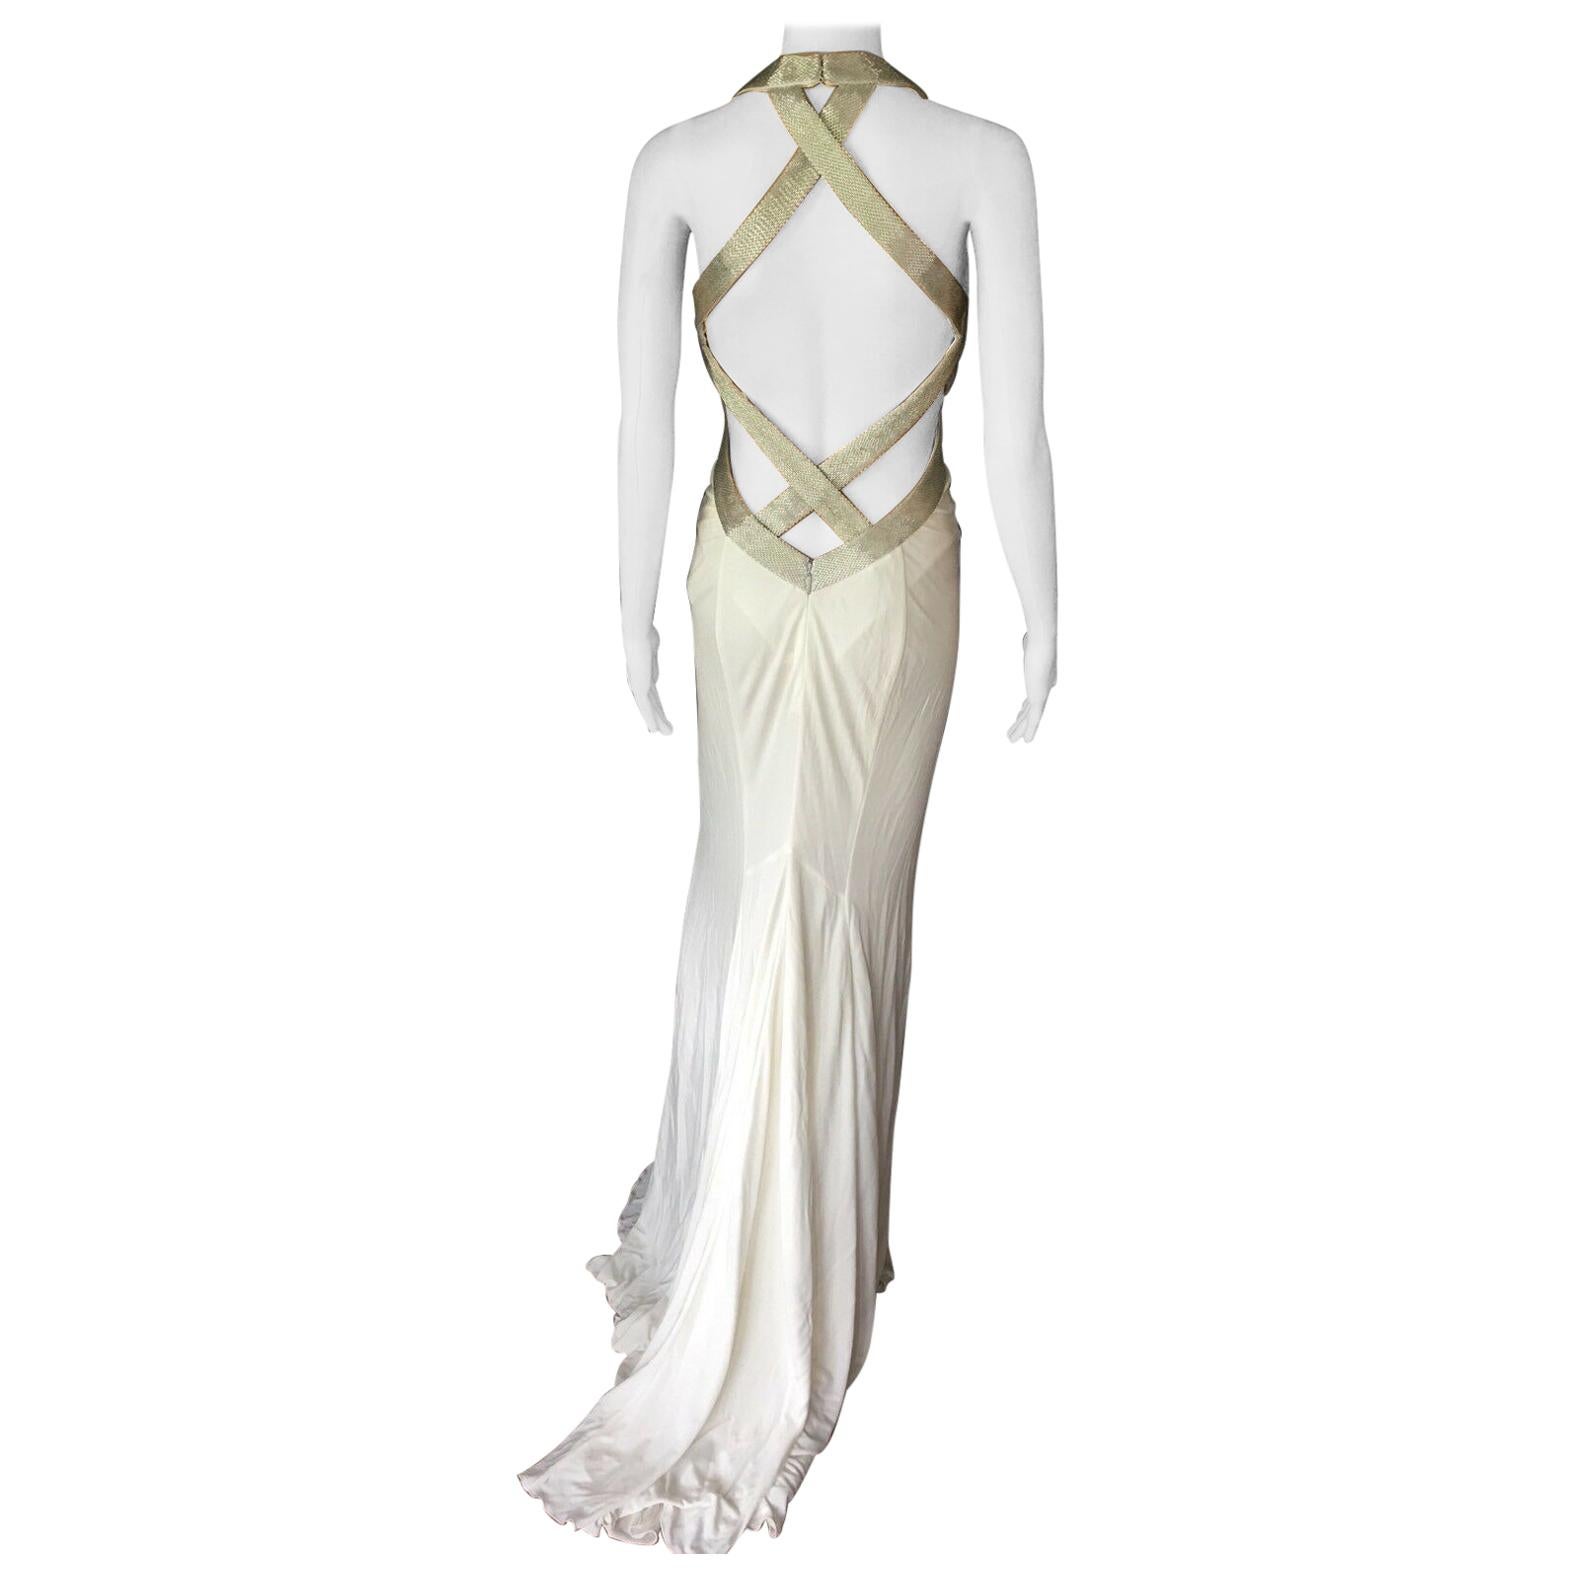 Roberto Cavalli Plunged Décolleté Open Back Embellished White Evening Dress Gown